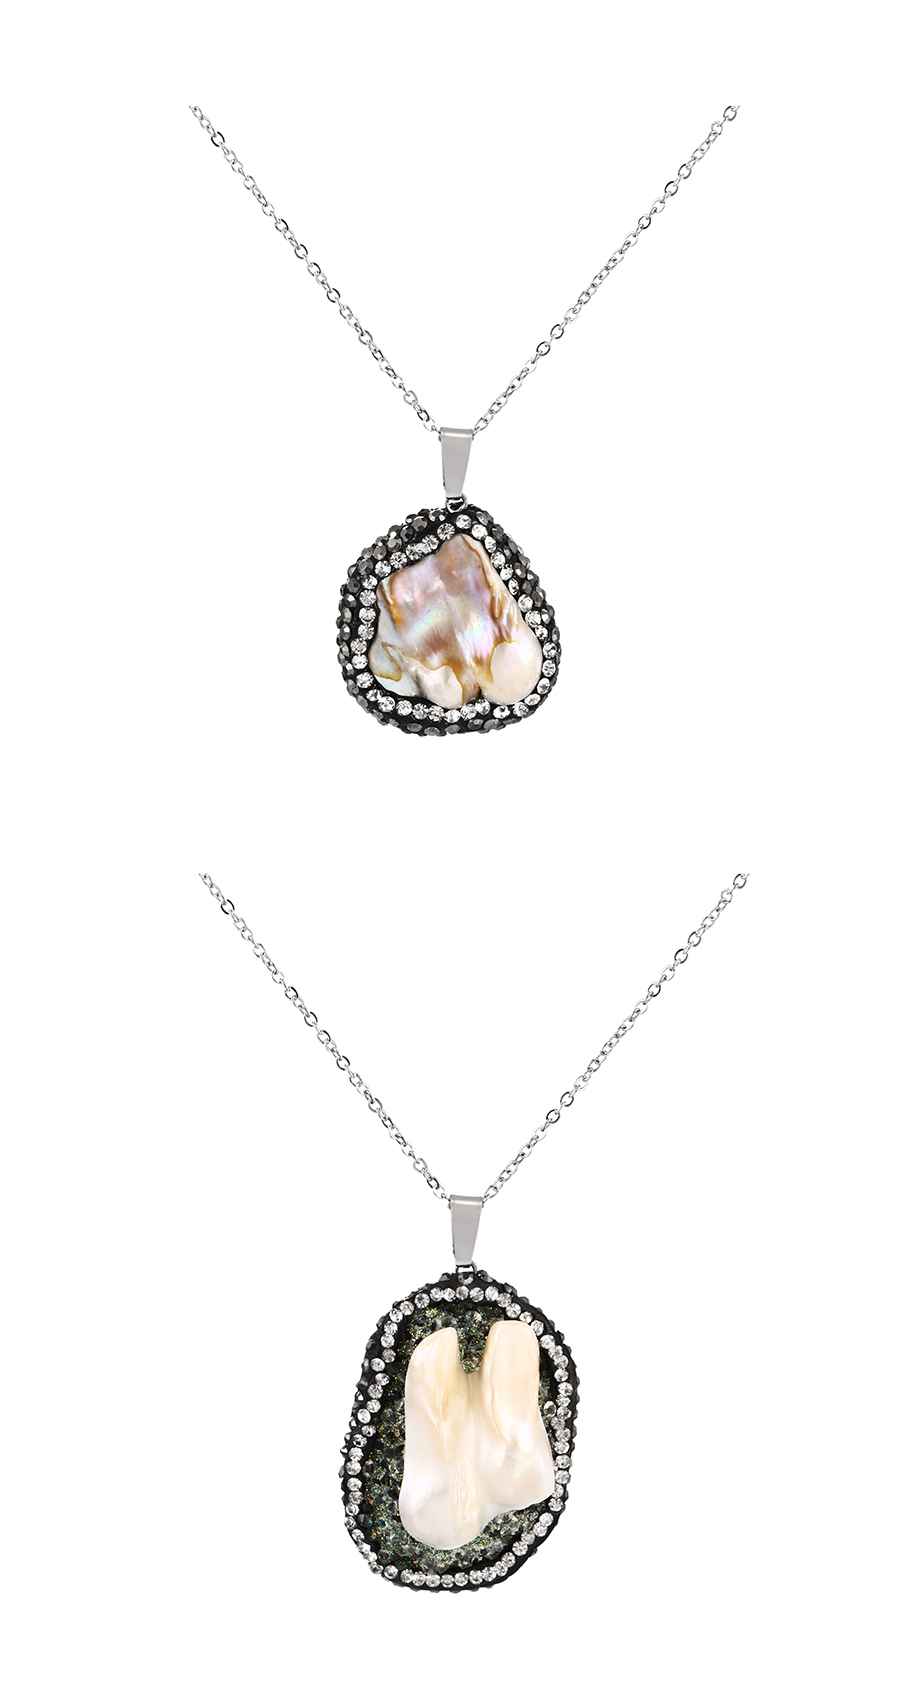 Fashion Silver-2 Brass And Diamond Resin Irregular Shell Pendant Necklace,Necklaces